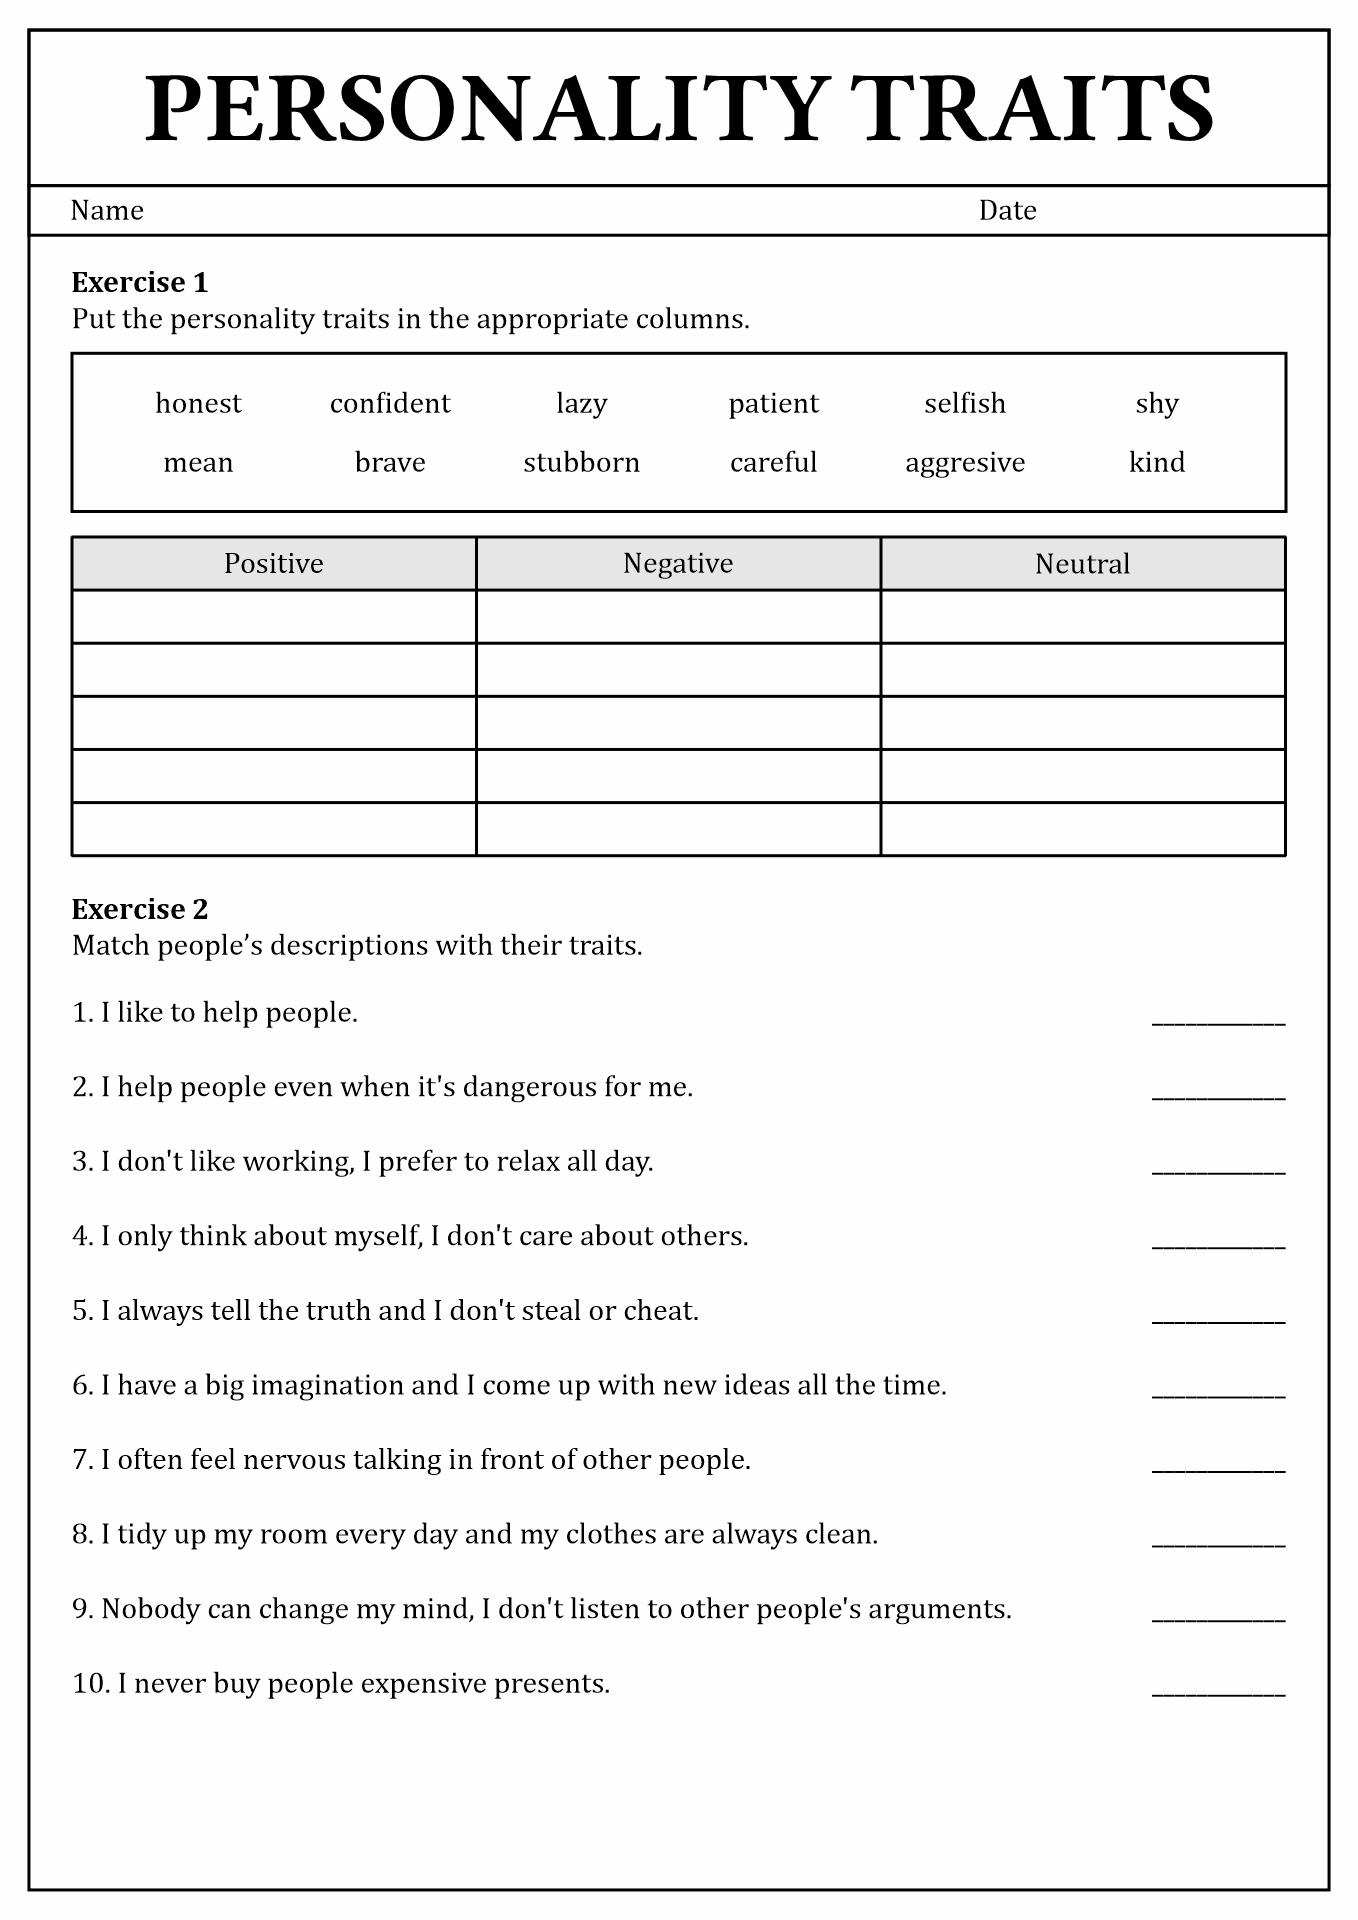 Personality Types Worksheet